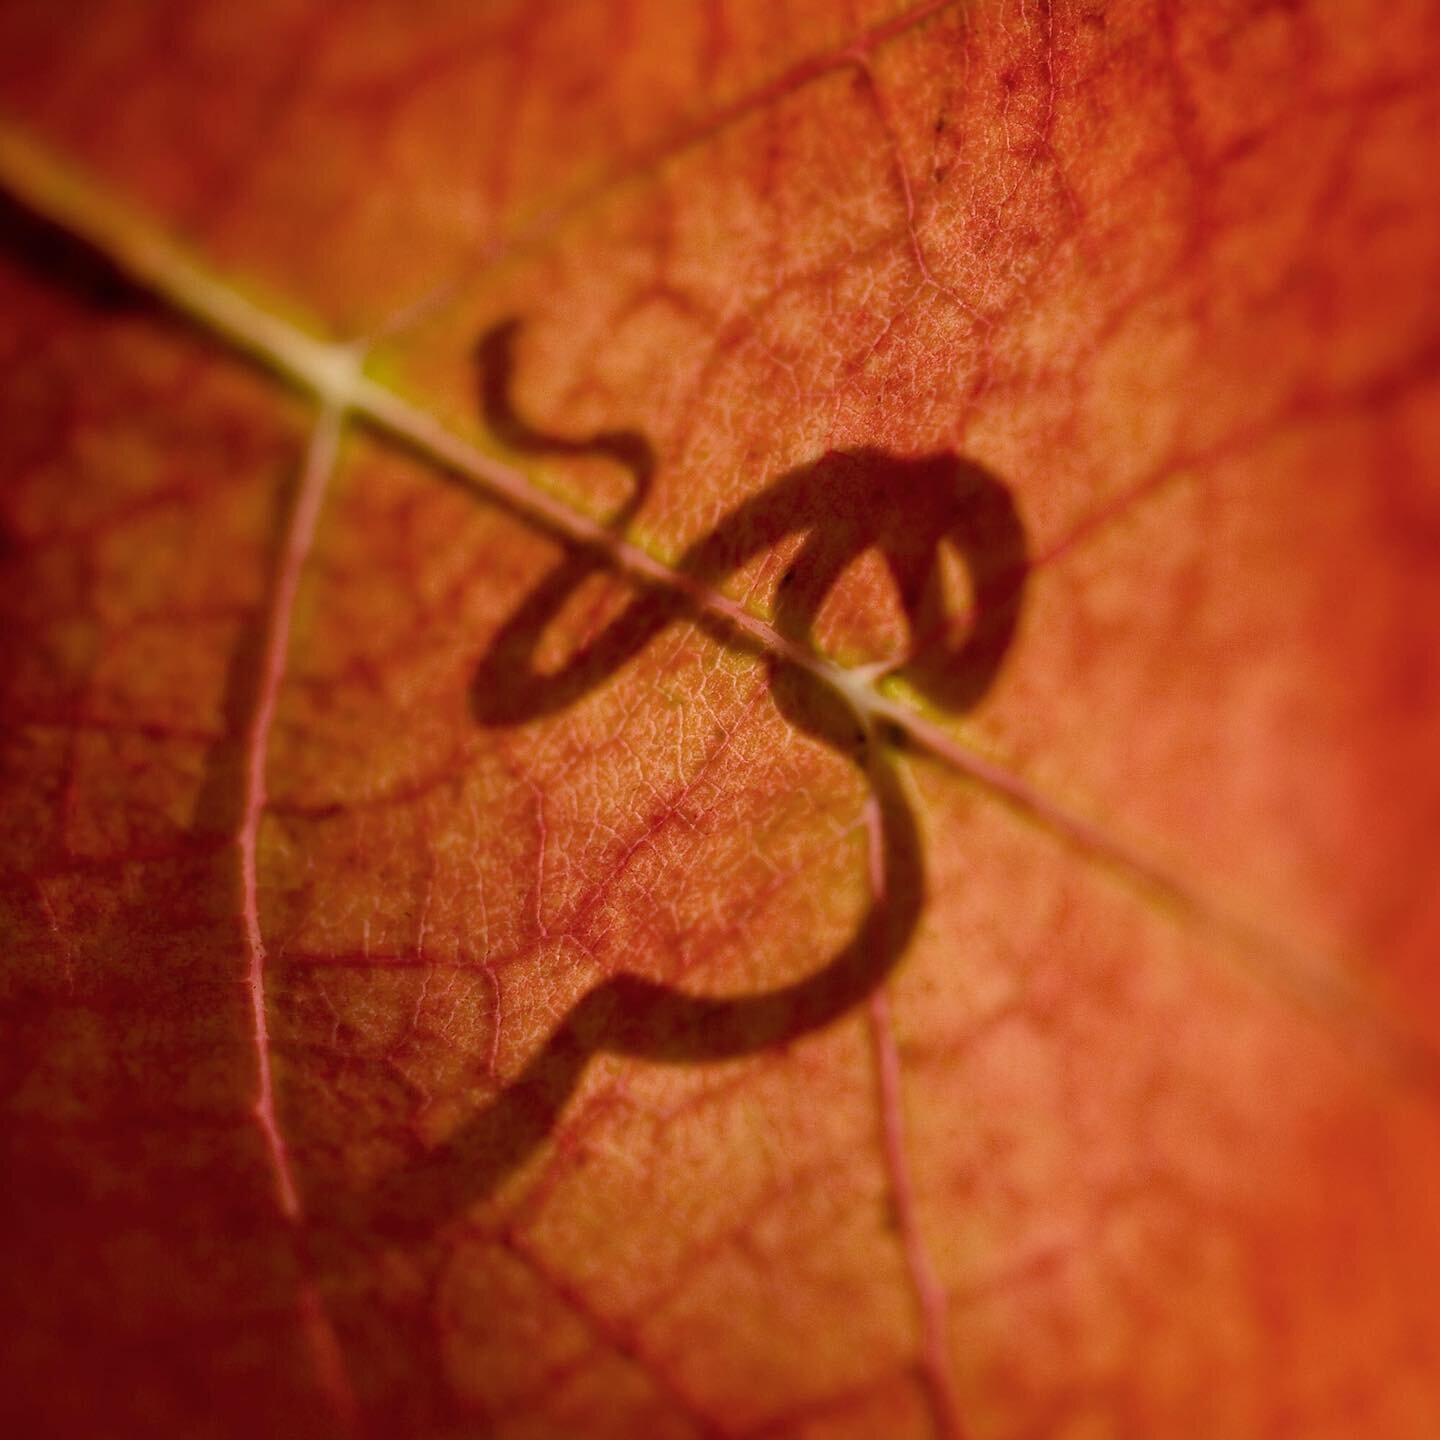 The shadow of a tendril on the back of a vine leaf in the Thomas Block at Paxton Wines McLaren Vale. An outtake from a series of macro images I shot in 2006 representing the seasons for @paxtonwines #wine
#winephotography
#southaustralianwine
#mclare